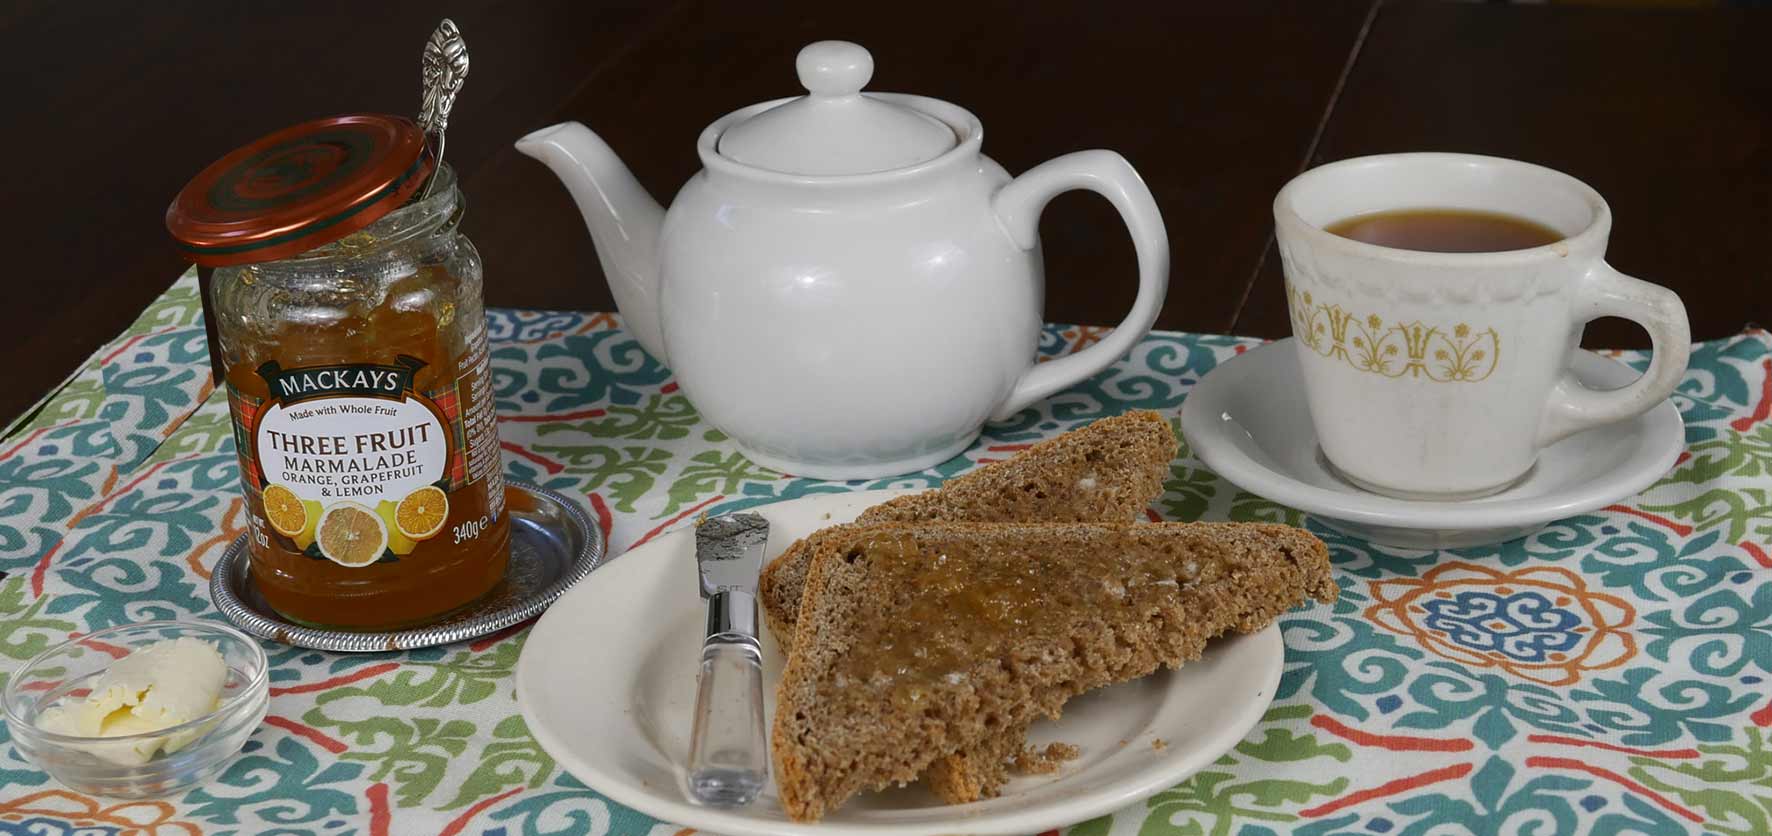 toast spread with marmalade, tea pot, tea cup, butter and spreader